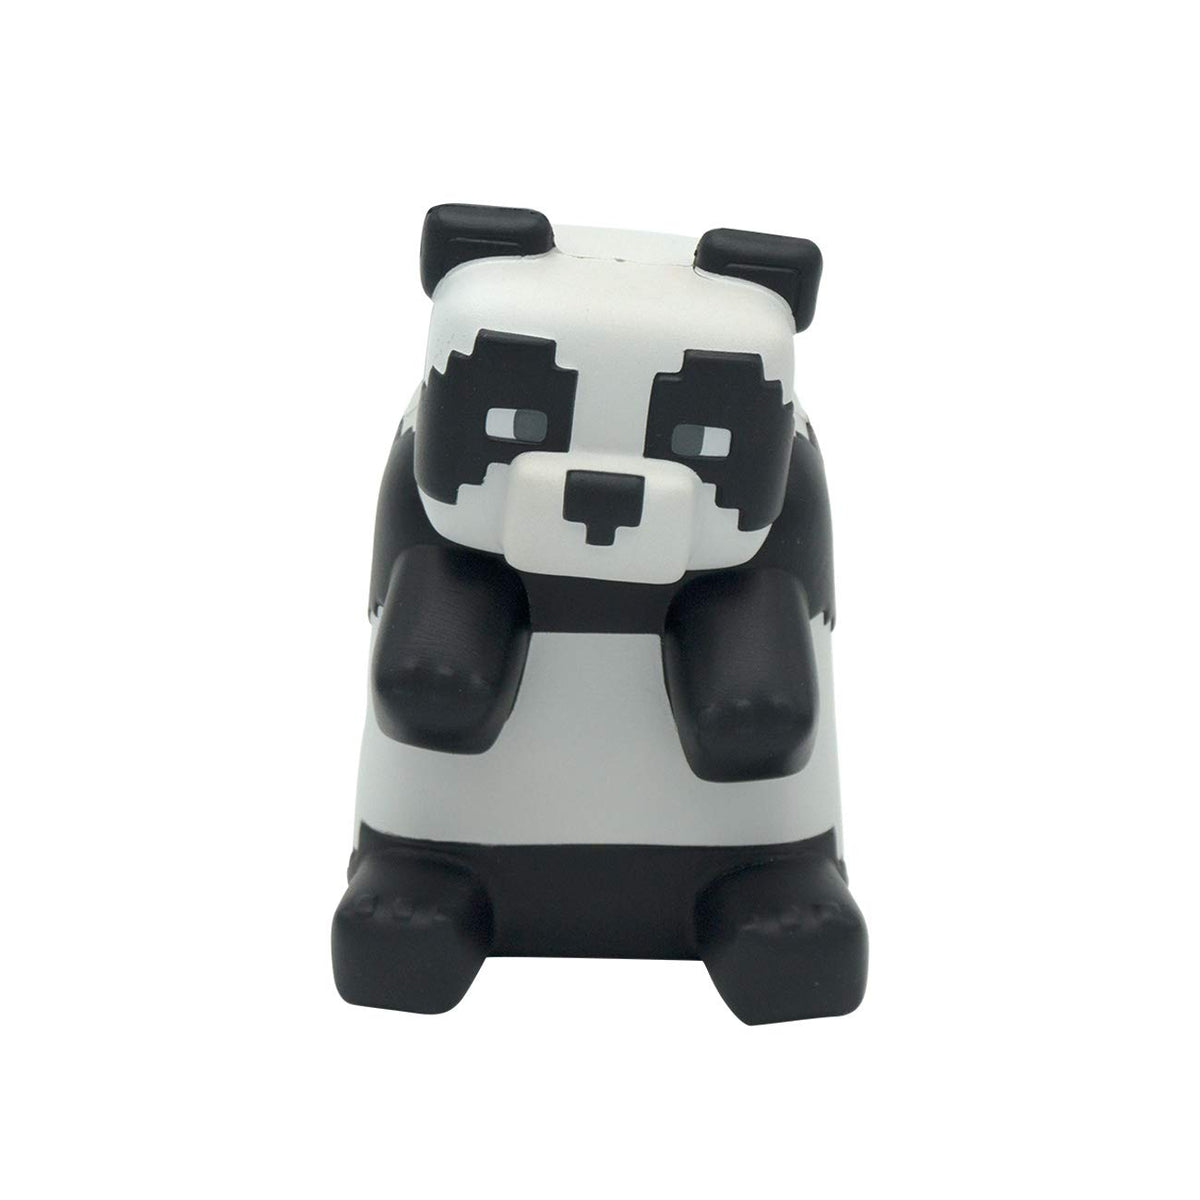 Minecraft Panda Mega SquishMe - Perfect for Party Favors, Classroom Prizes, Stress Relief Toys, Fidget and Treasure Boxes - Minecraft Figures, Squishy Animals & Small Toys